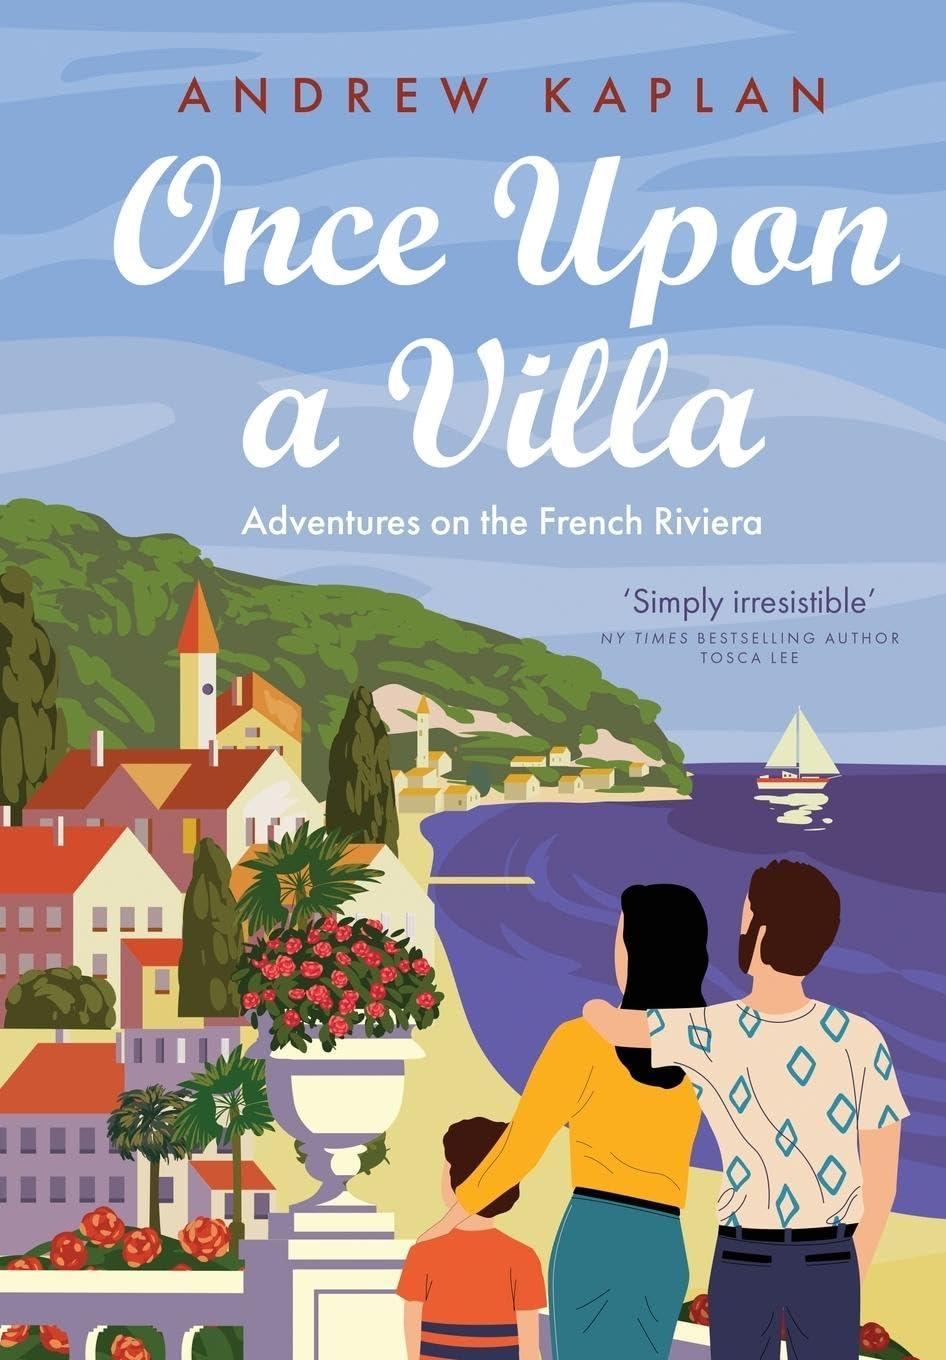 "Once Upon a Villa: Adventures on the French Riviera," by Andrew Kaplan.